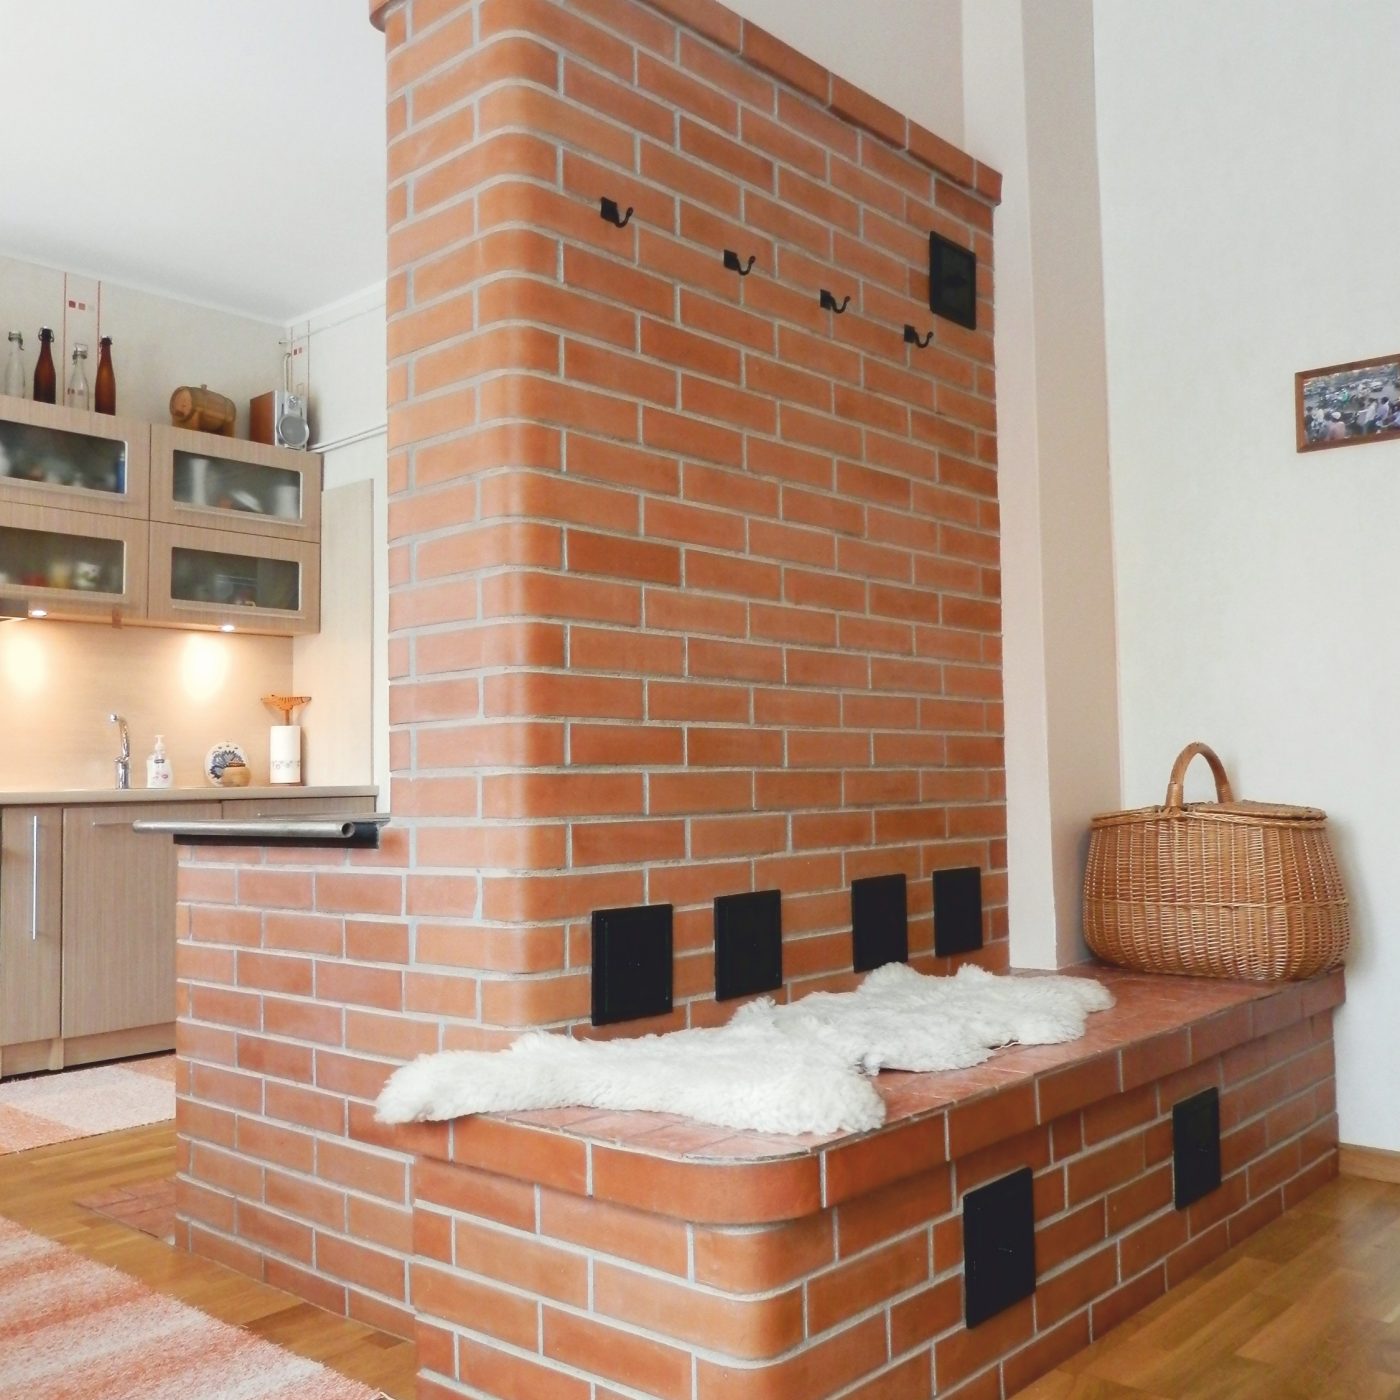 Fireplace is built with Red Smooth bricks from Aseri plant.